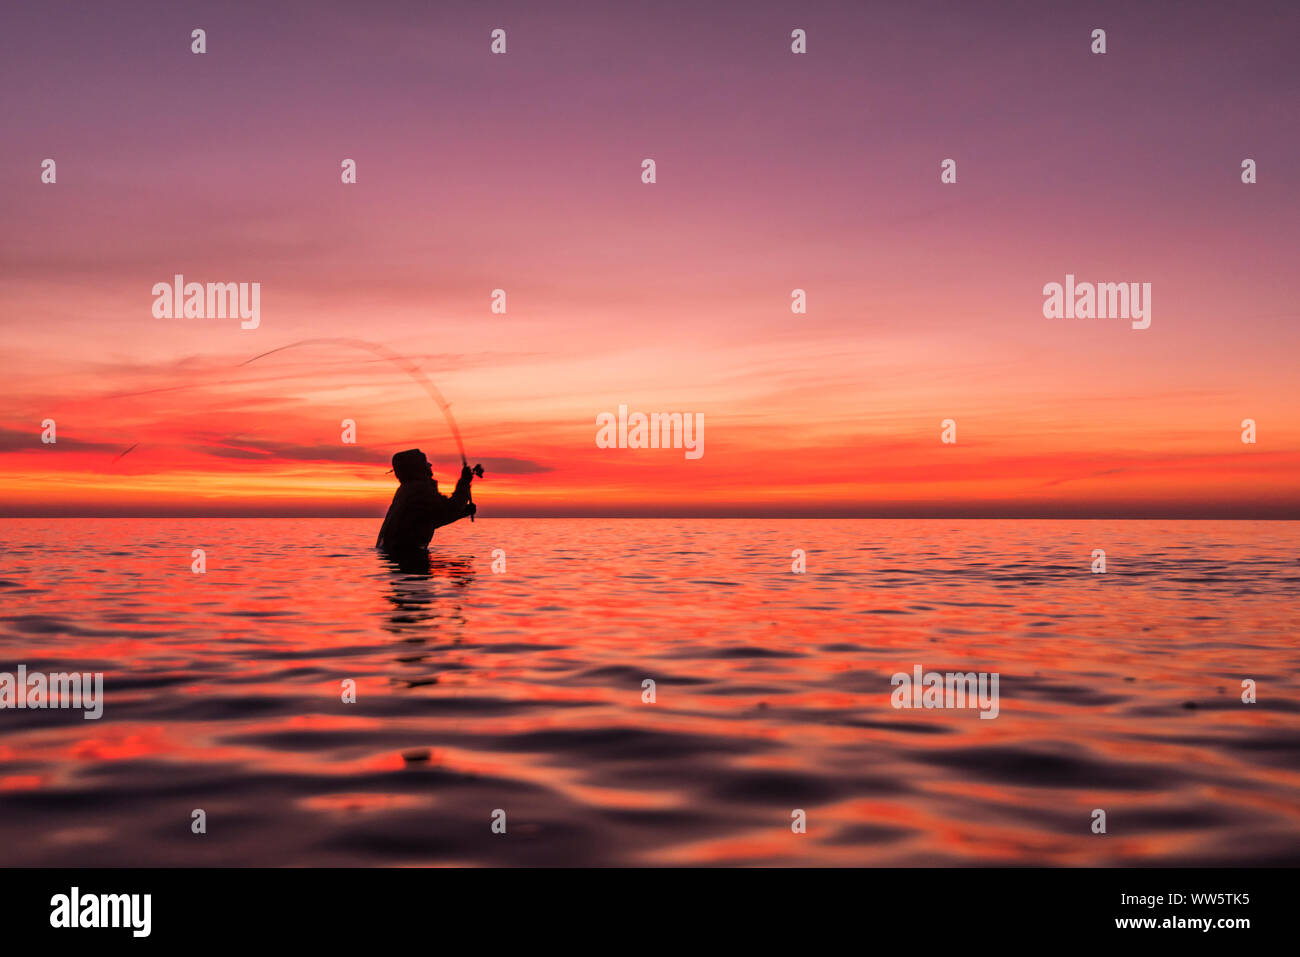 Angler fishing in the Baltic Sea at sundown standing in water. Stock Photo